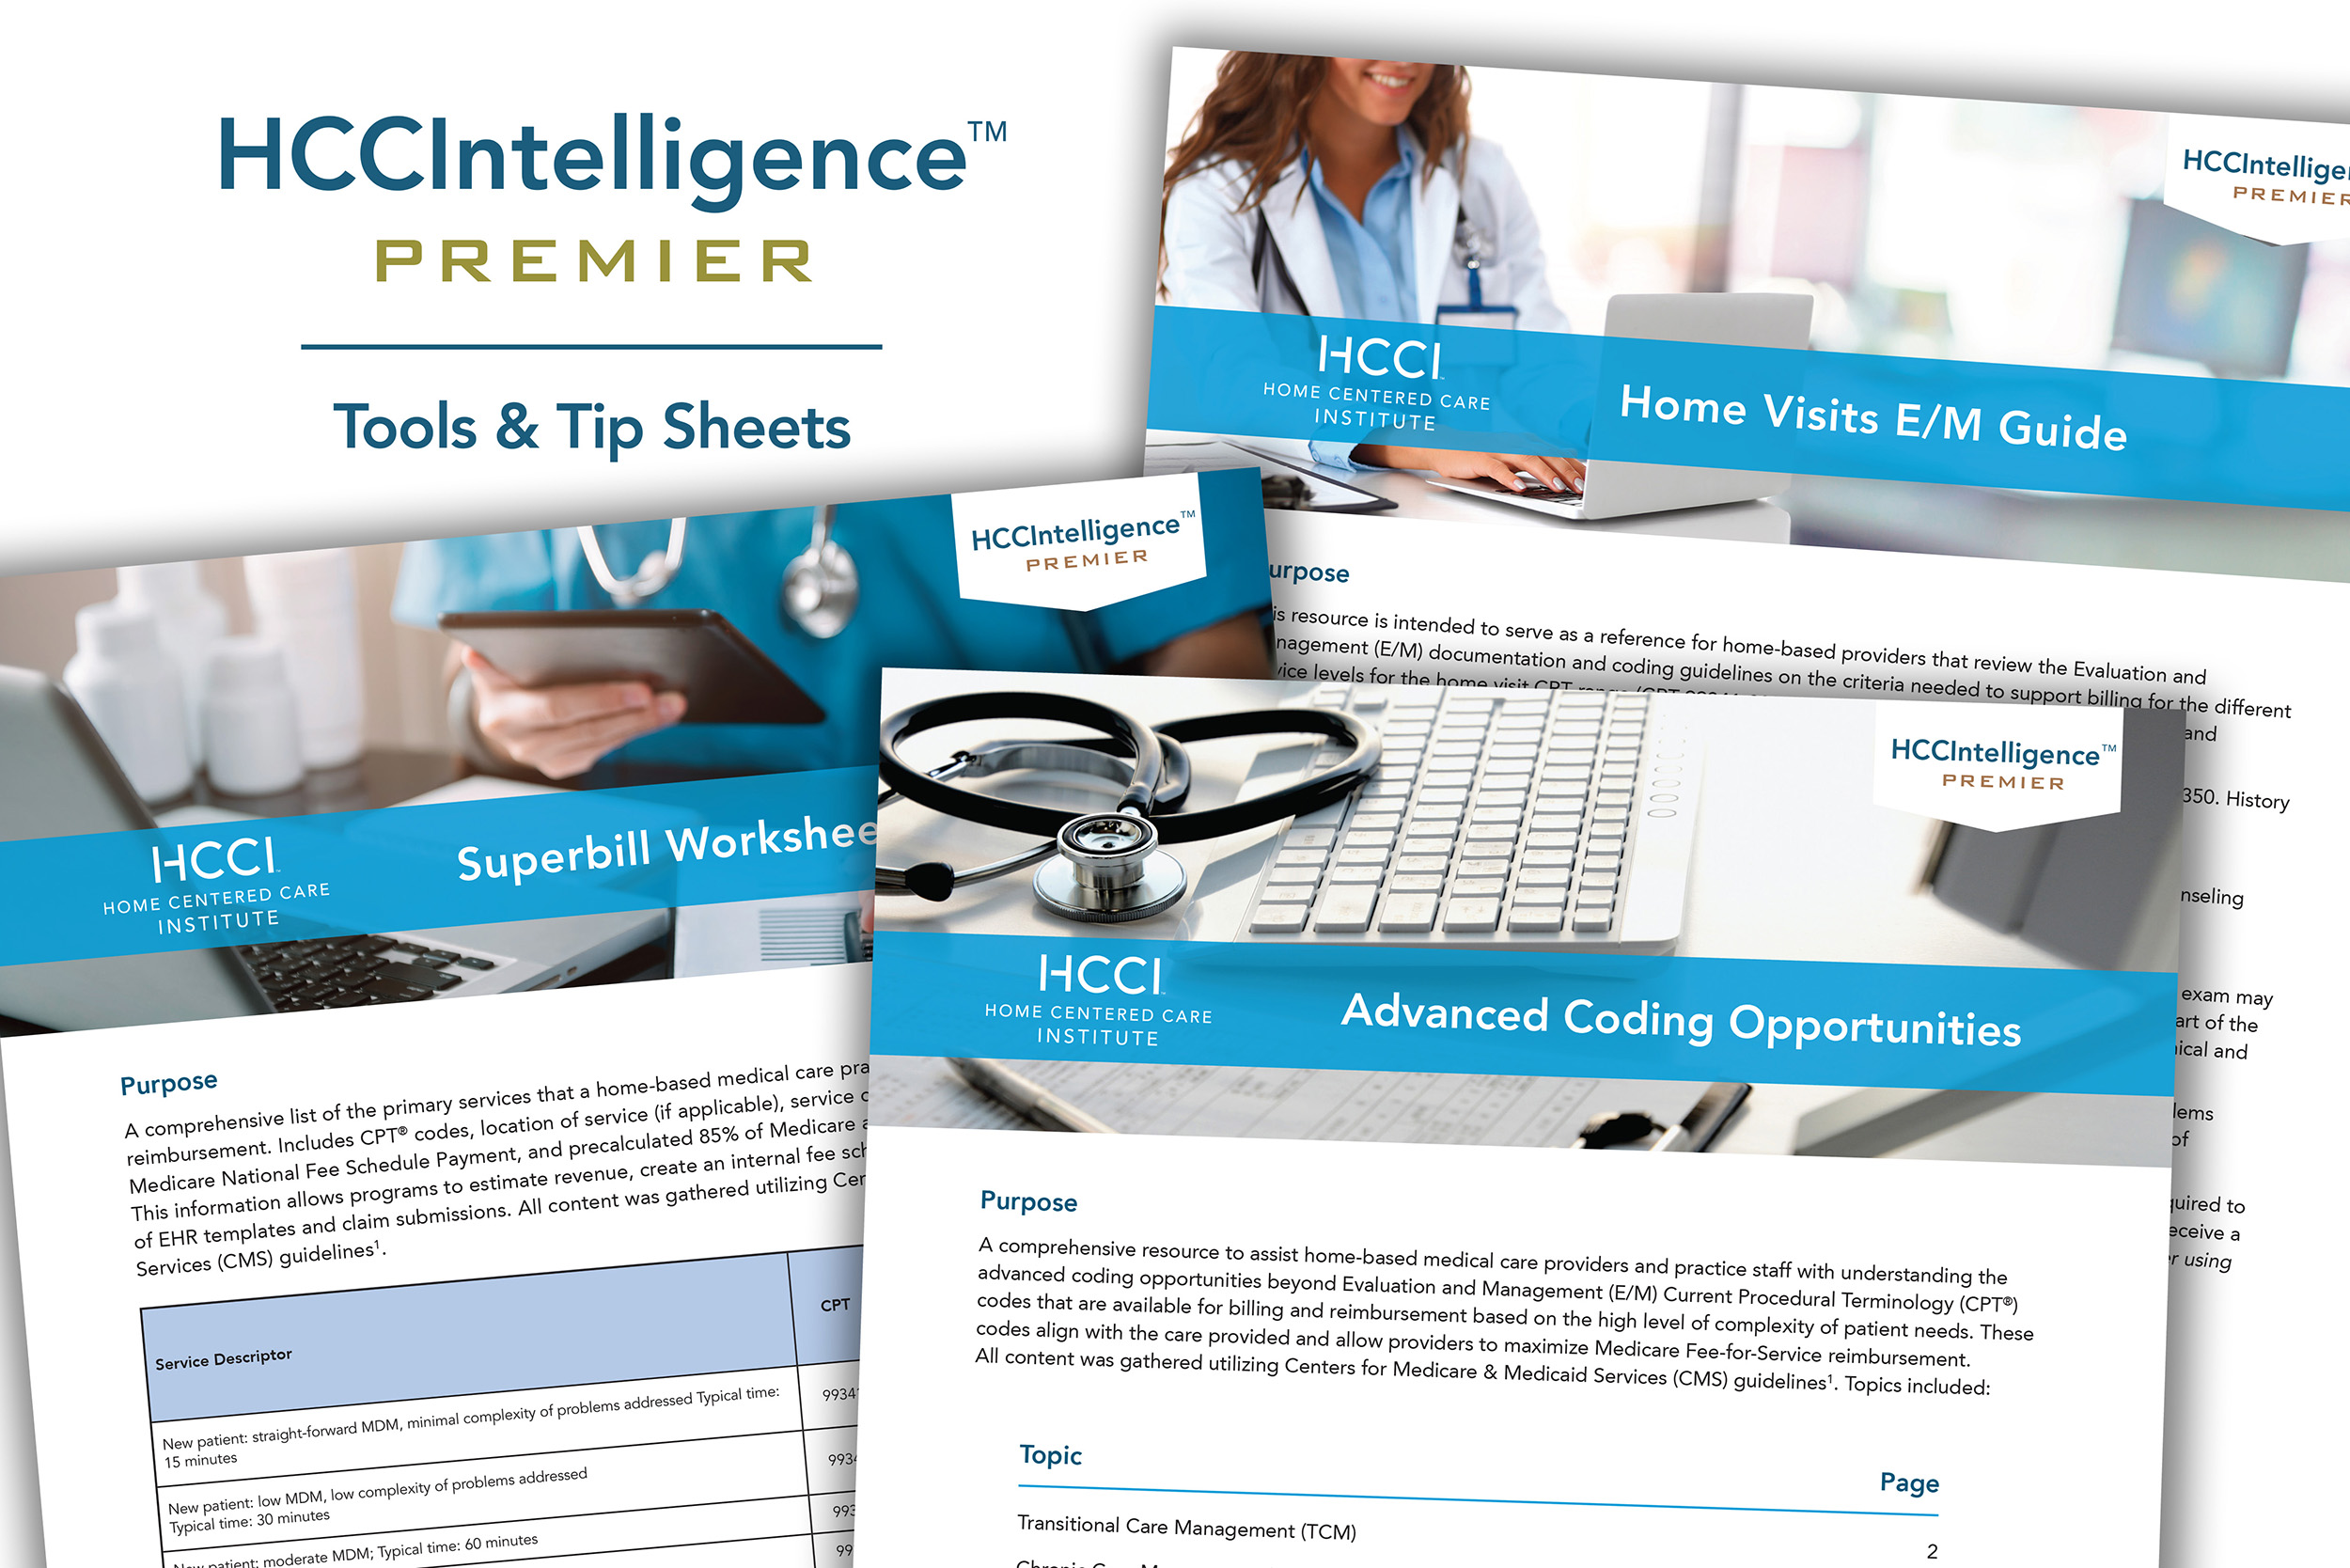 Introducing HCCIntelligence™ Premier Tools & Tip Sheets